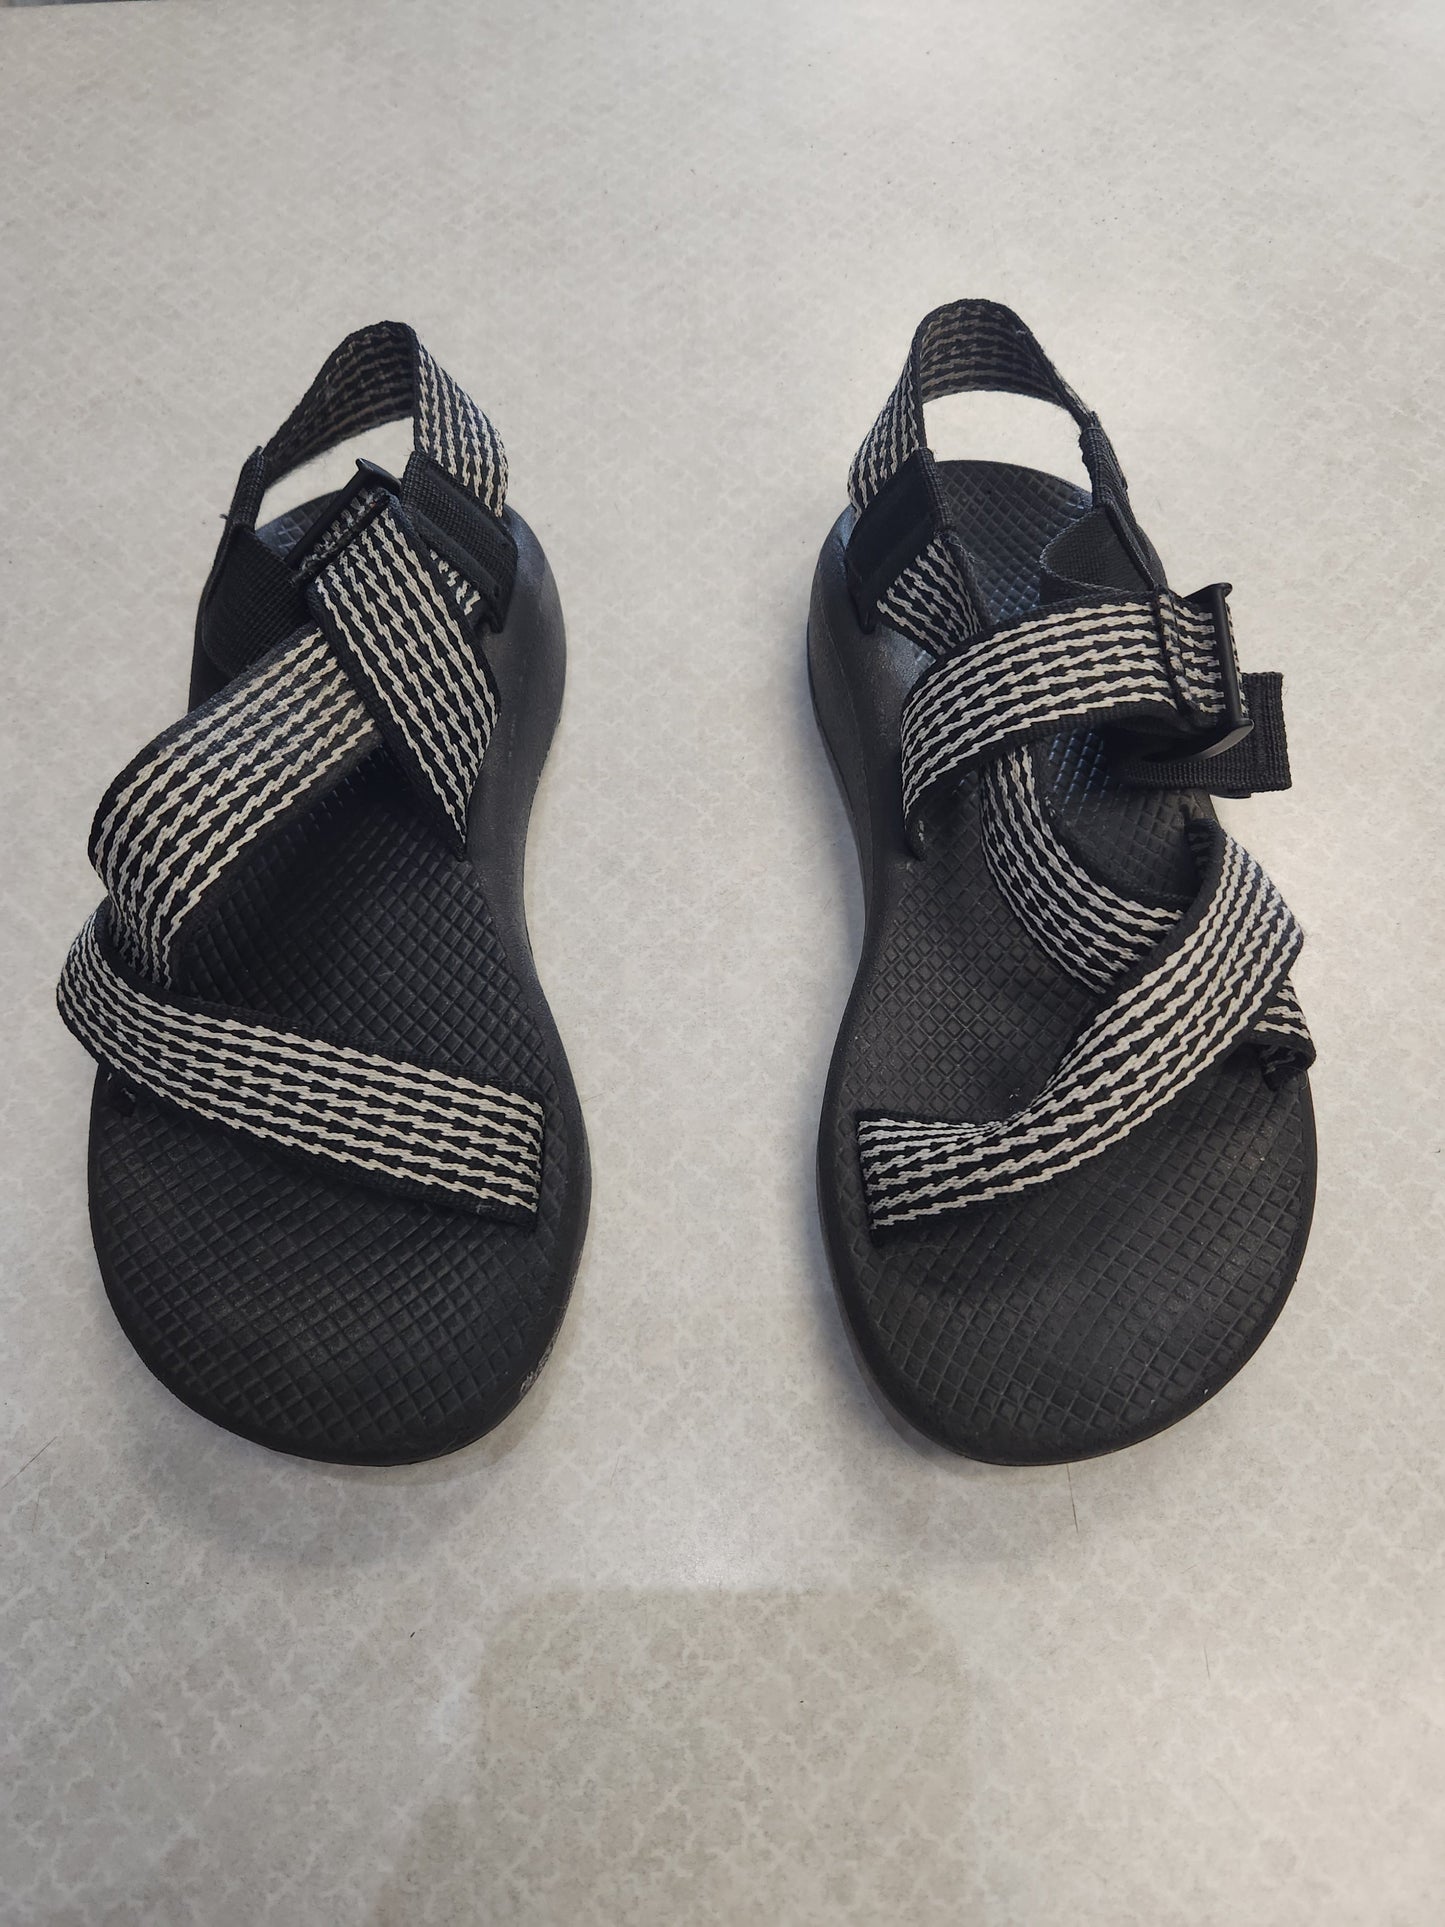 Black Sandals Flats Chacos, Size 8